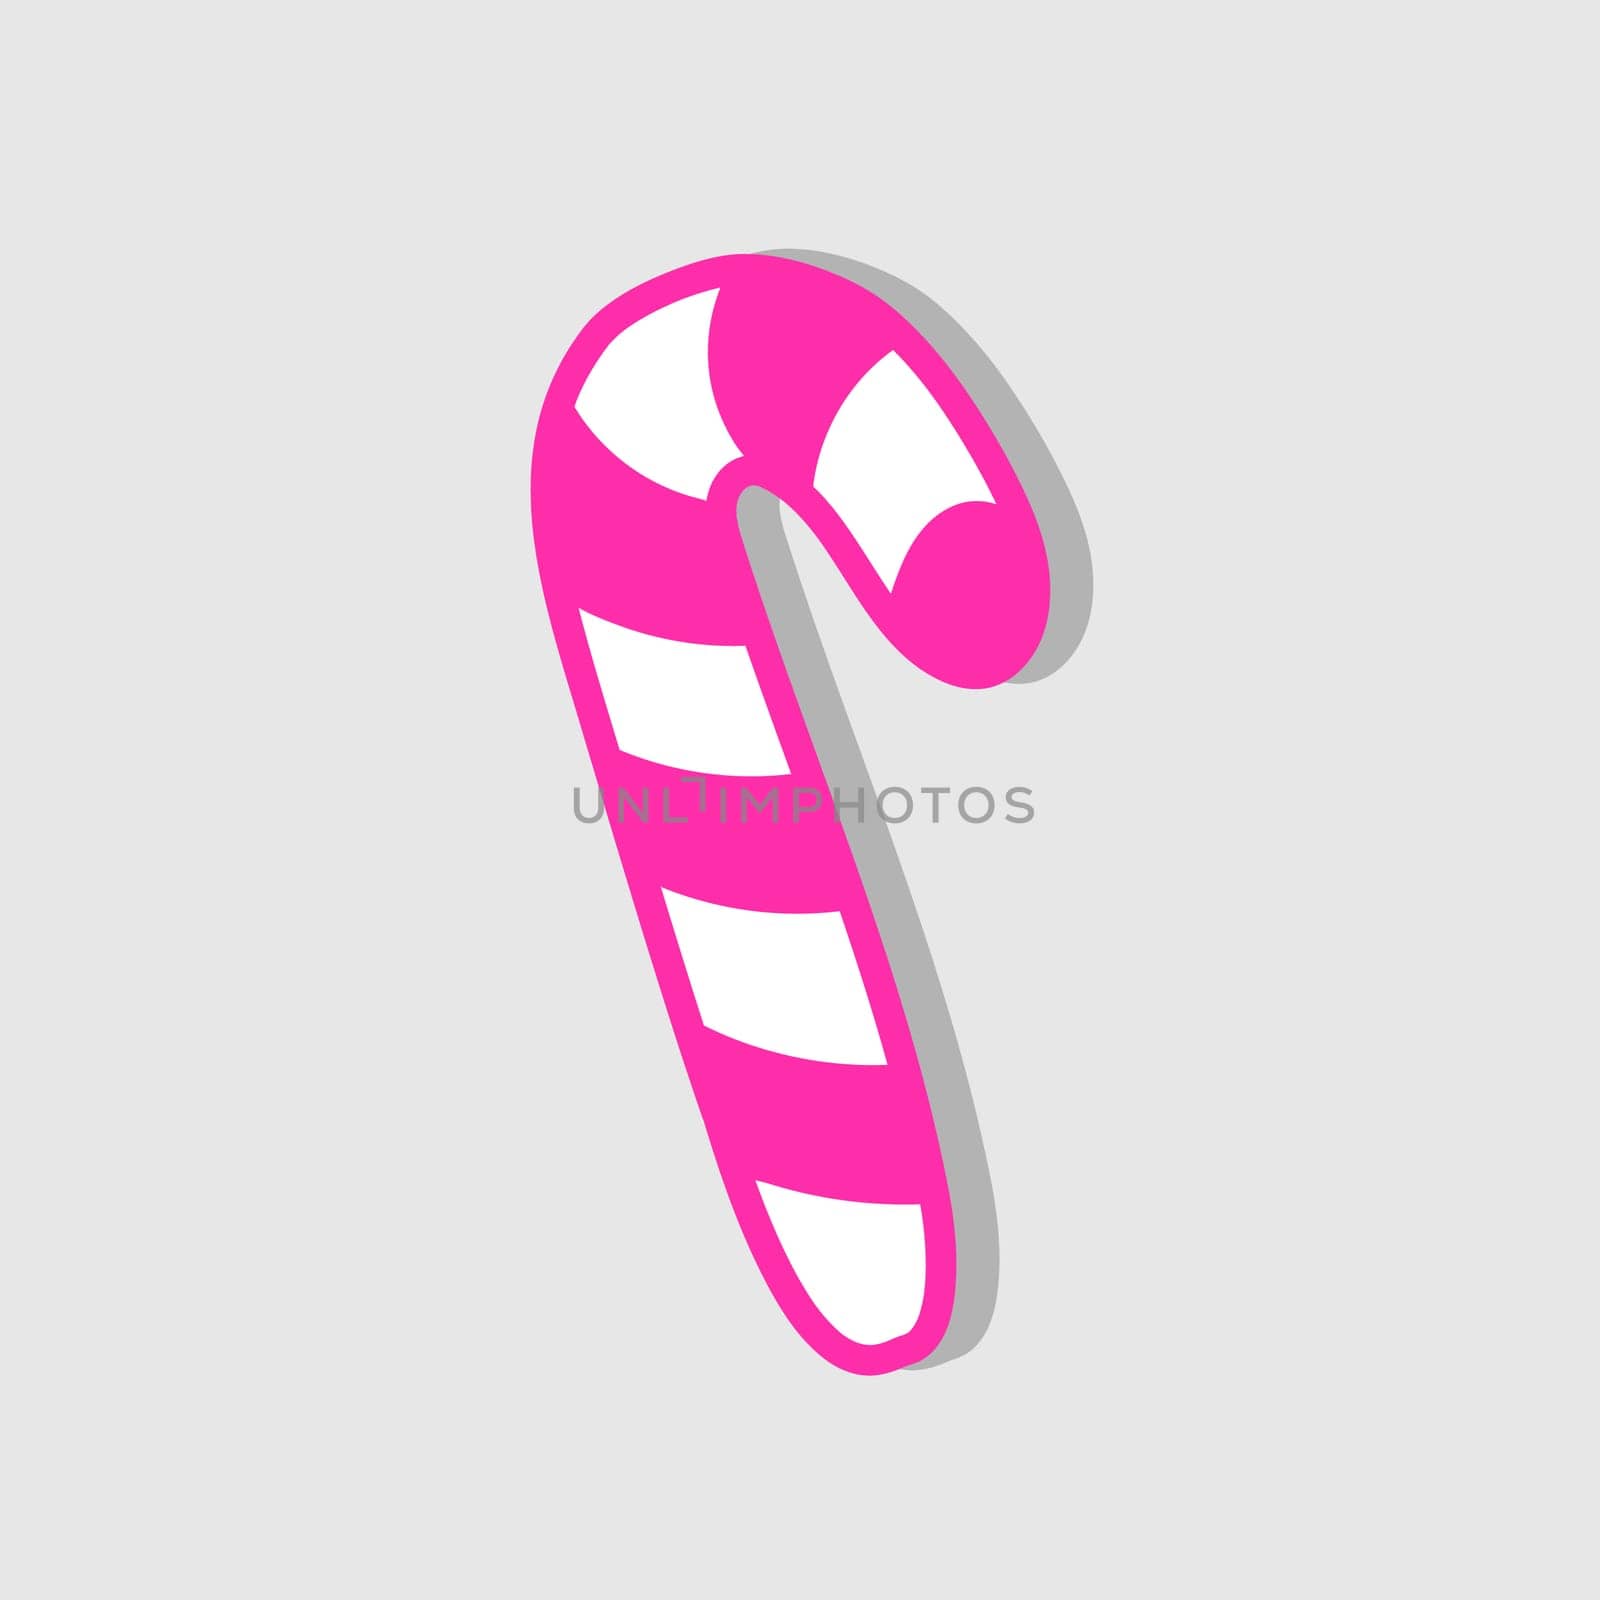 Cute Christmas candy cane - vector icon in pink color. Striped candy isolated on grey background. Minimalist sticker